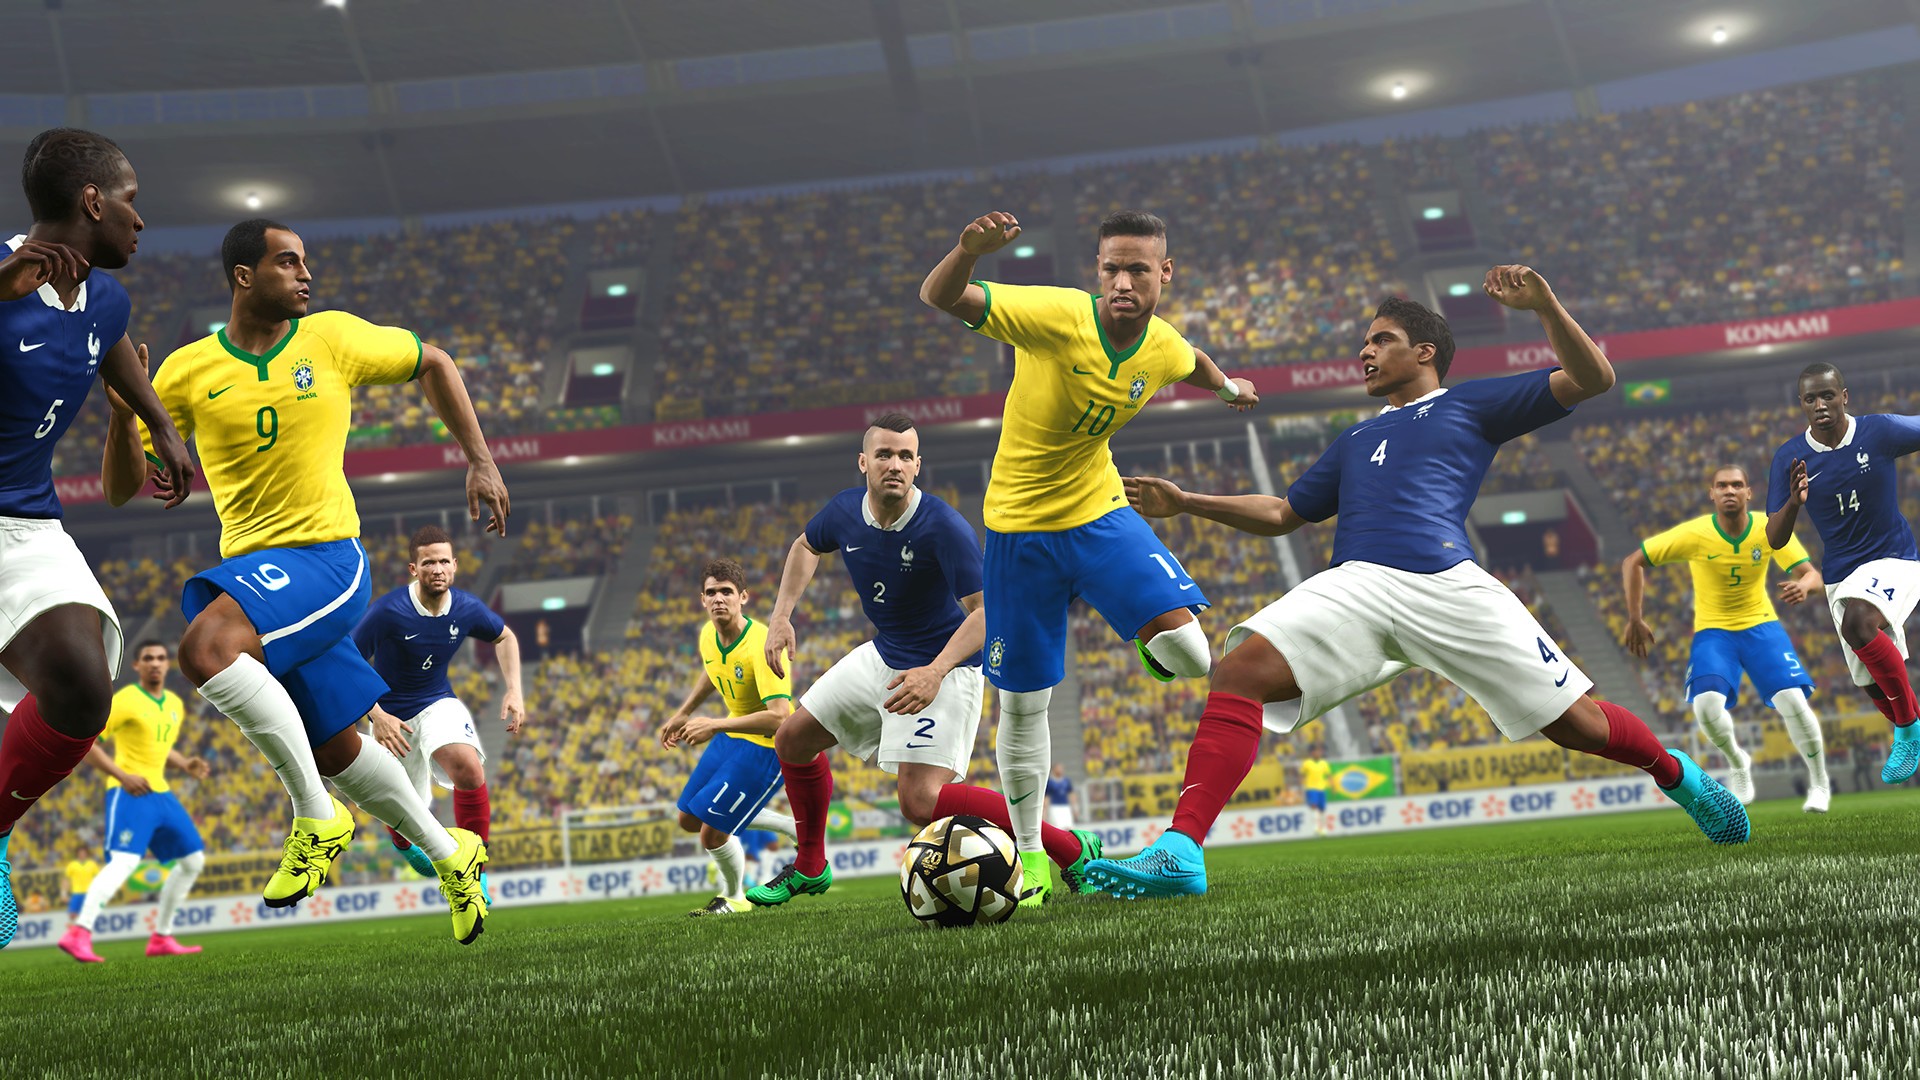 Pes 16 for 320x240 for Multiplayer